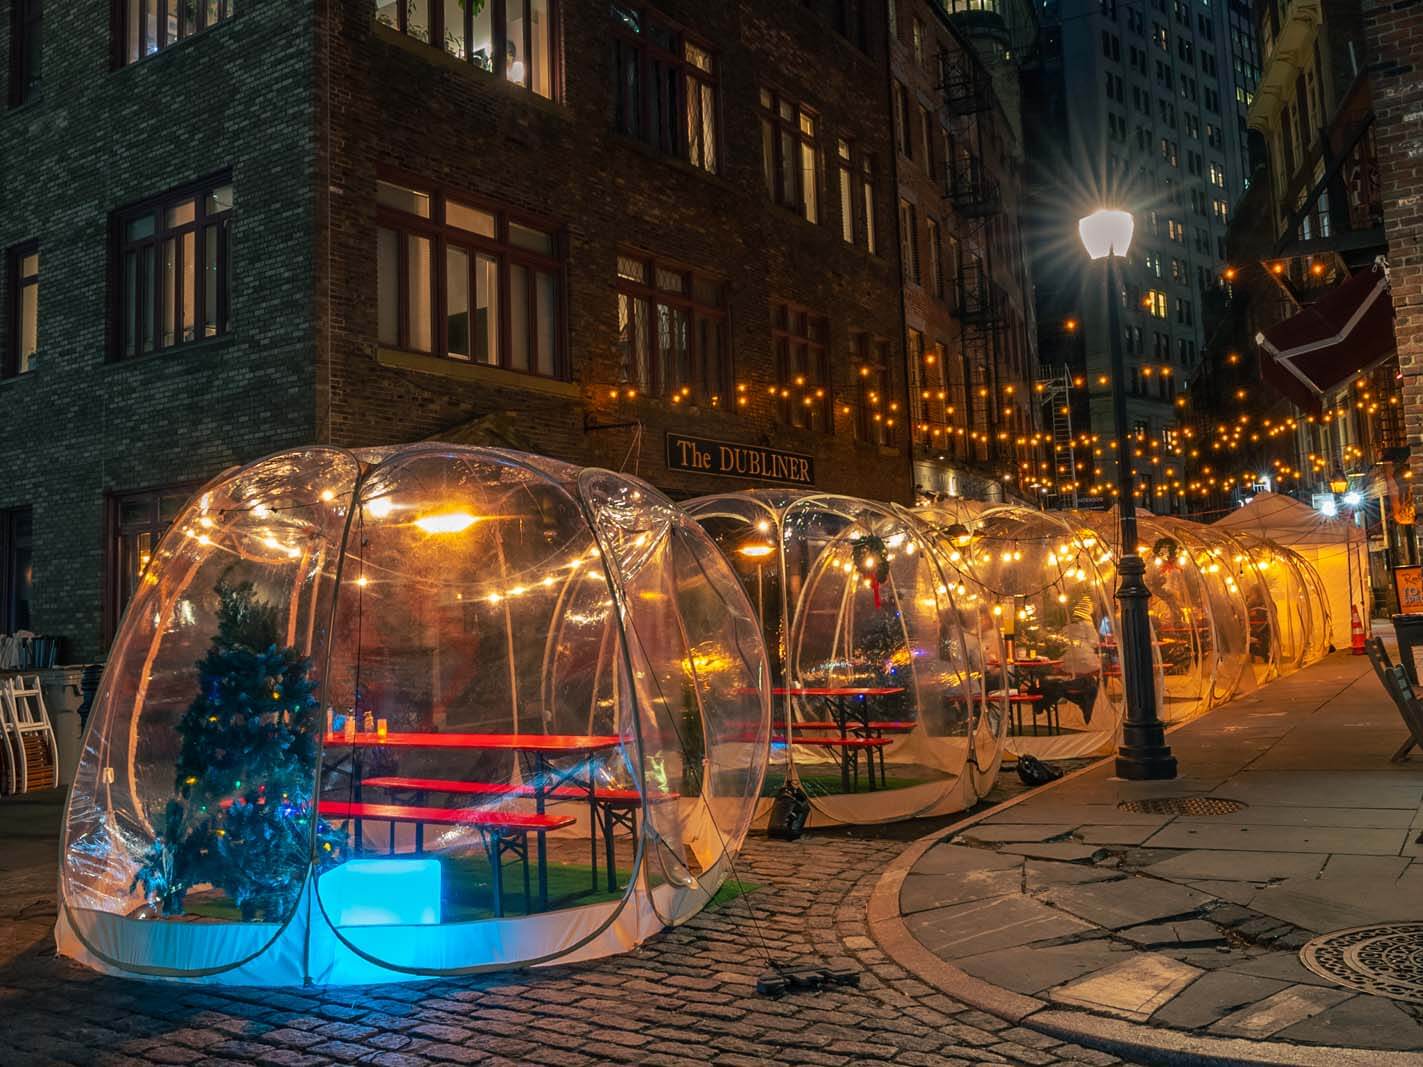 Stone Street winter outdoor dining in NYC